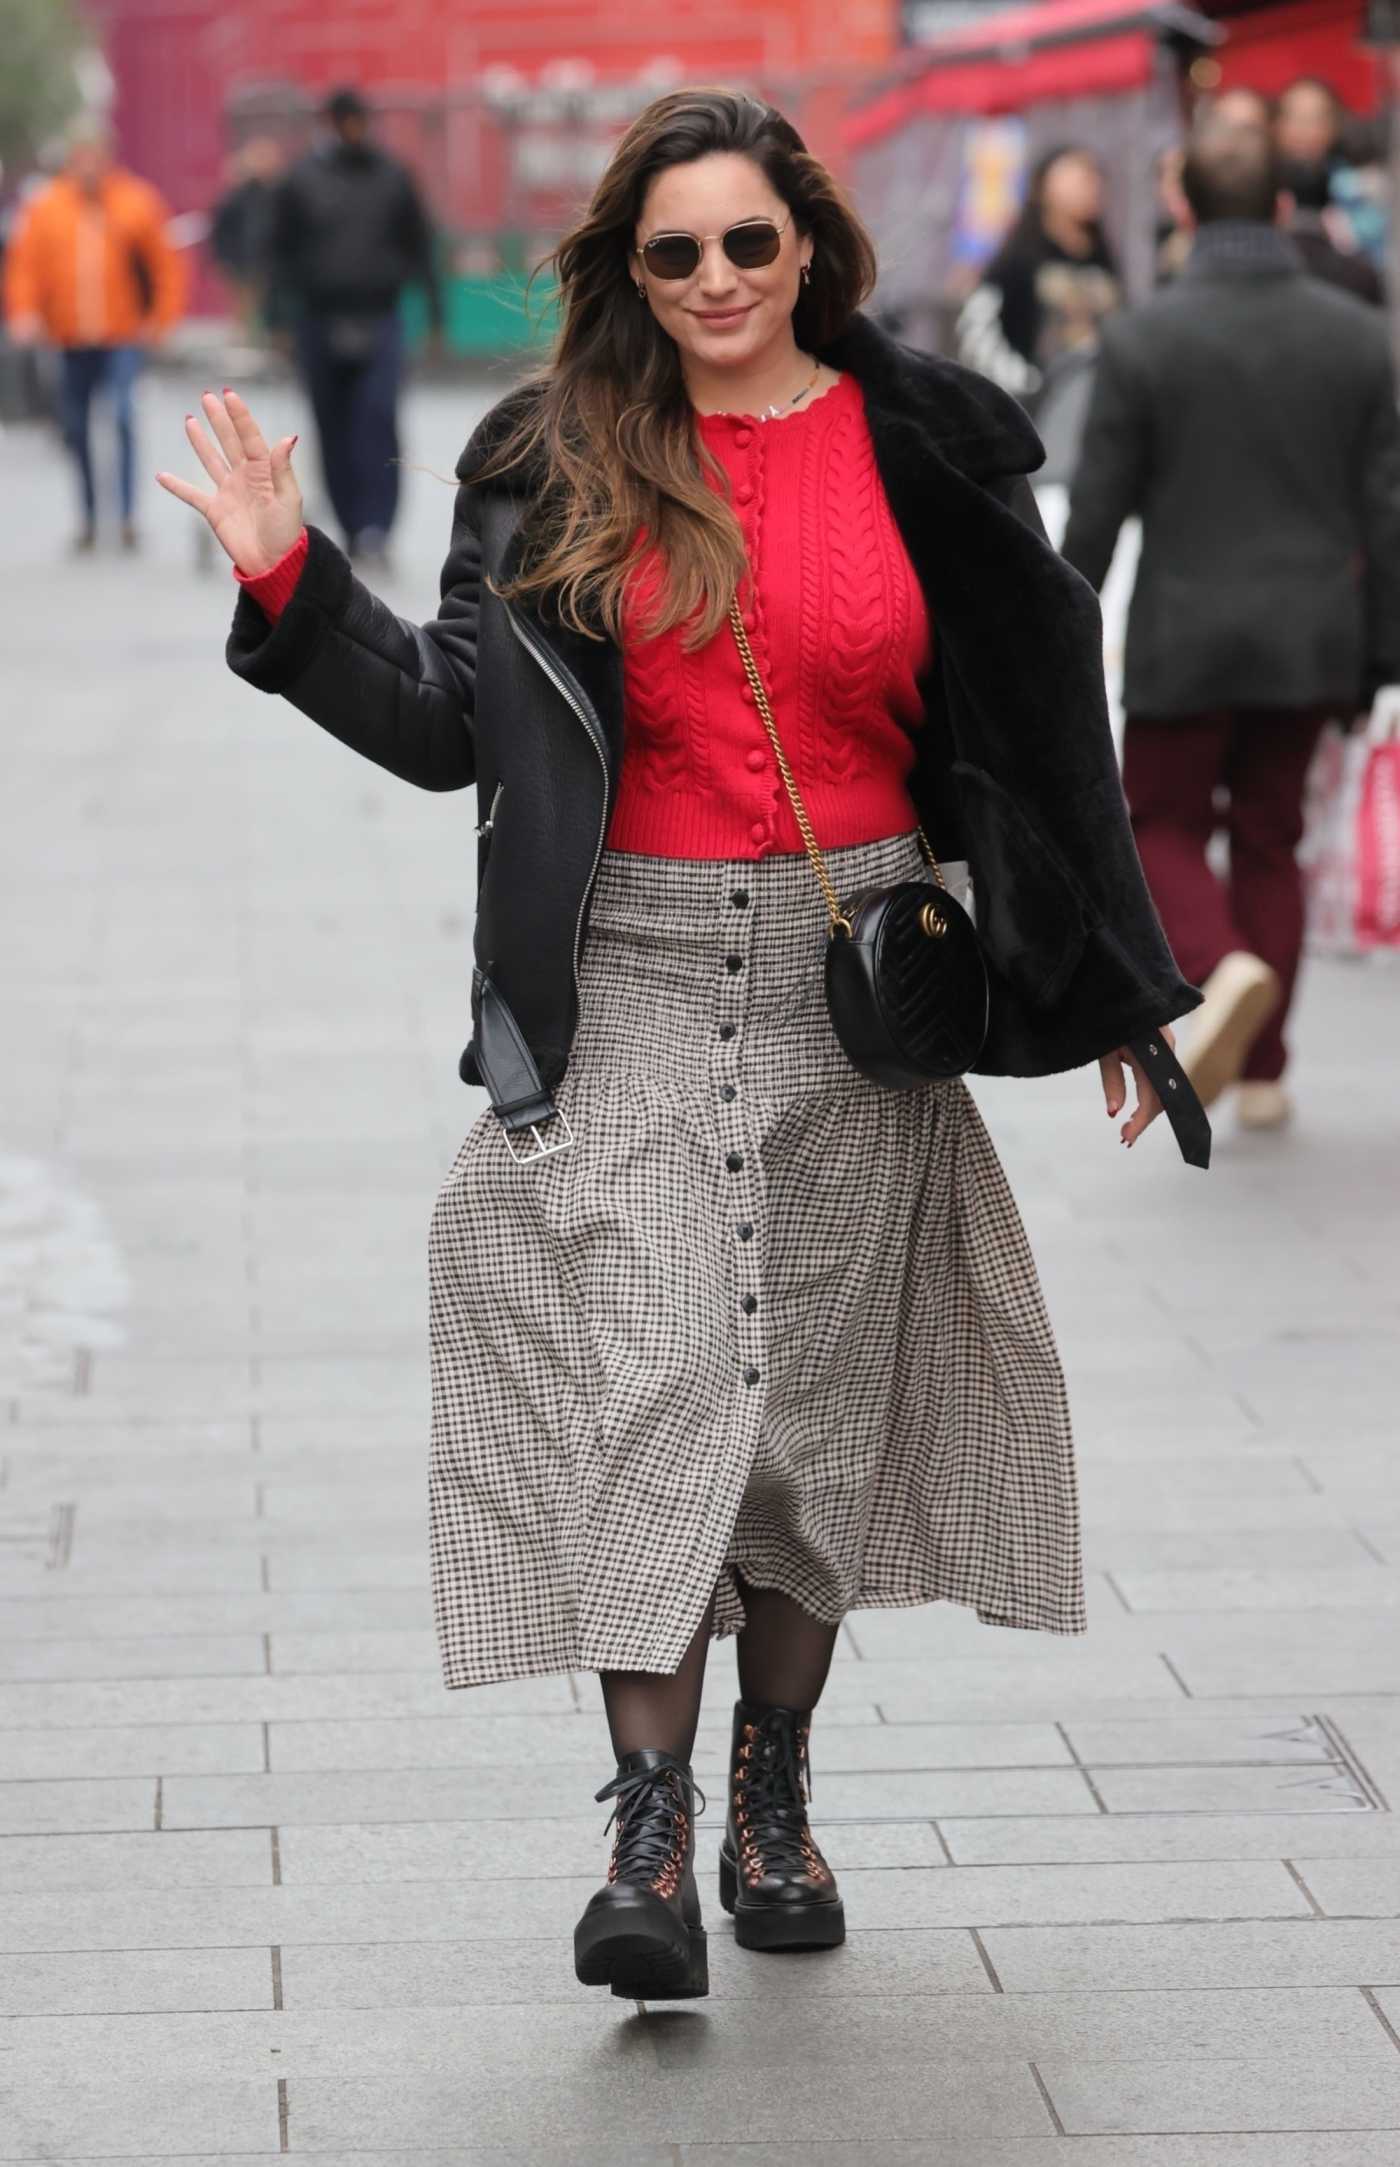 Kelly Brook in a Red Blouse Leaves Her Heart FM Show at the Global Radio Studios in London 12/21/2021